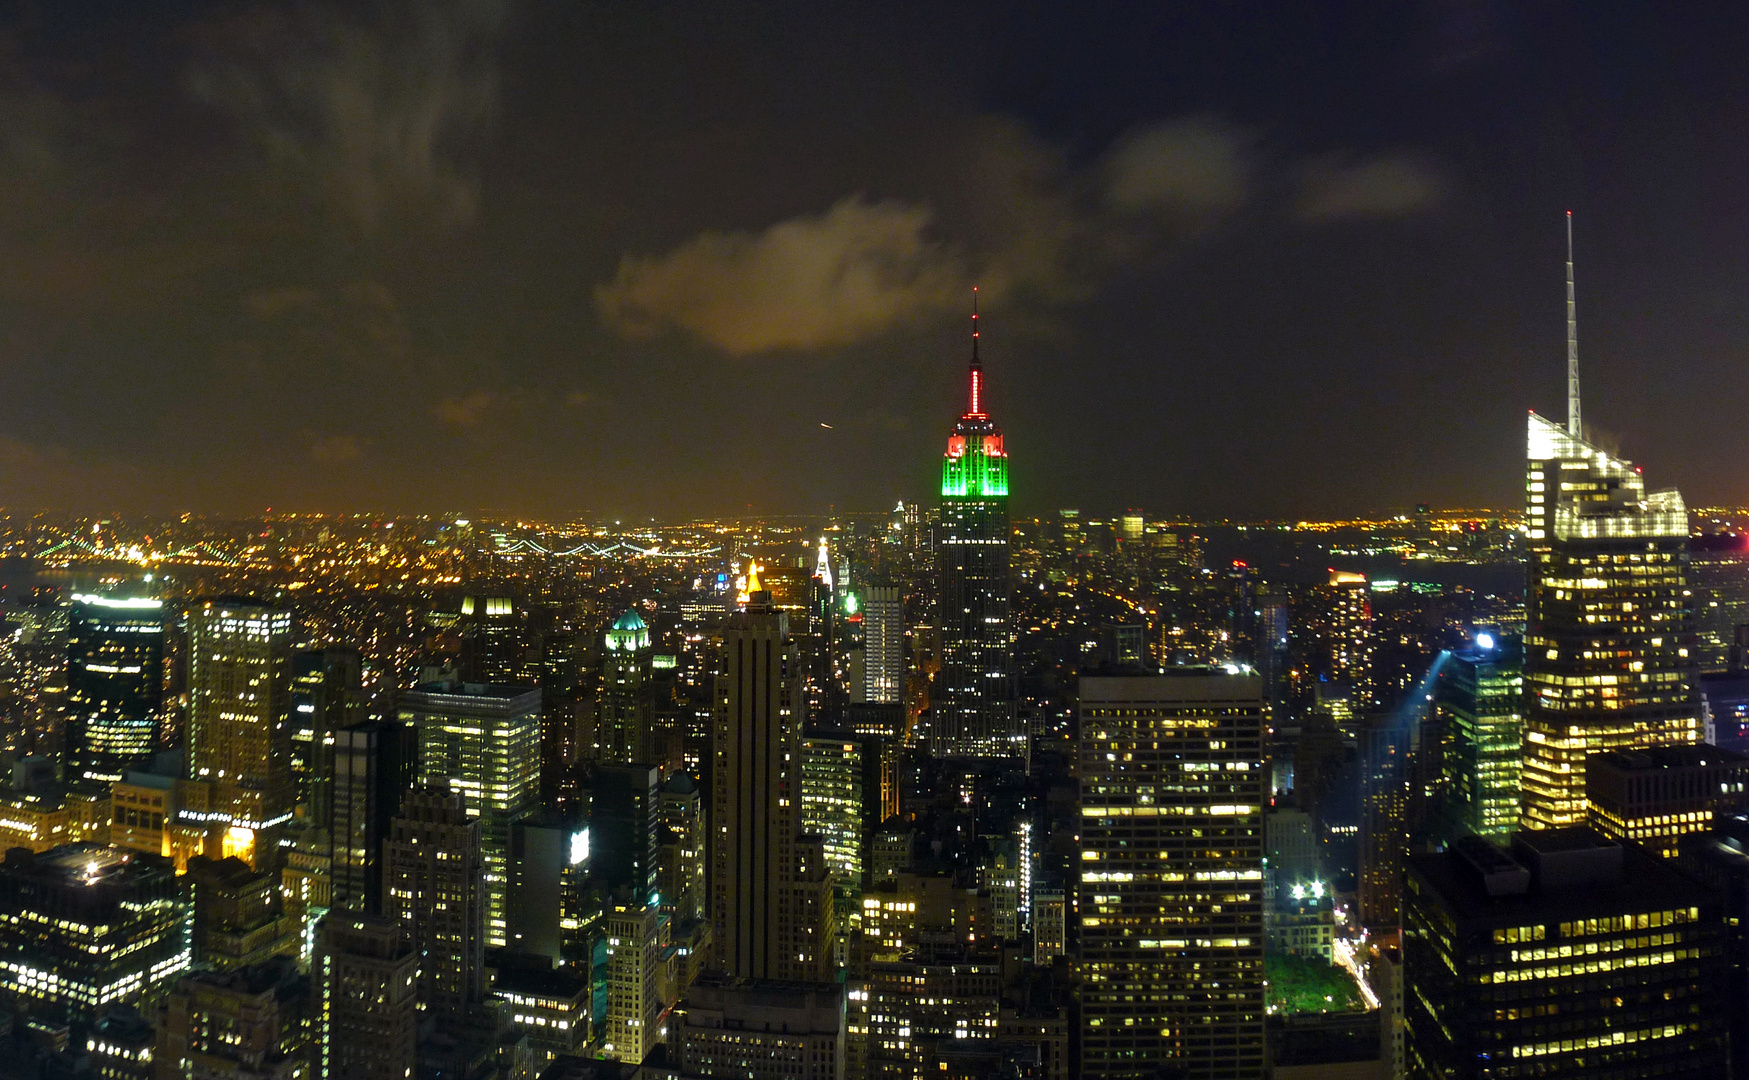 Empire State Building at night!